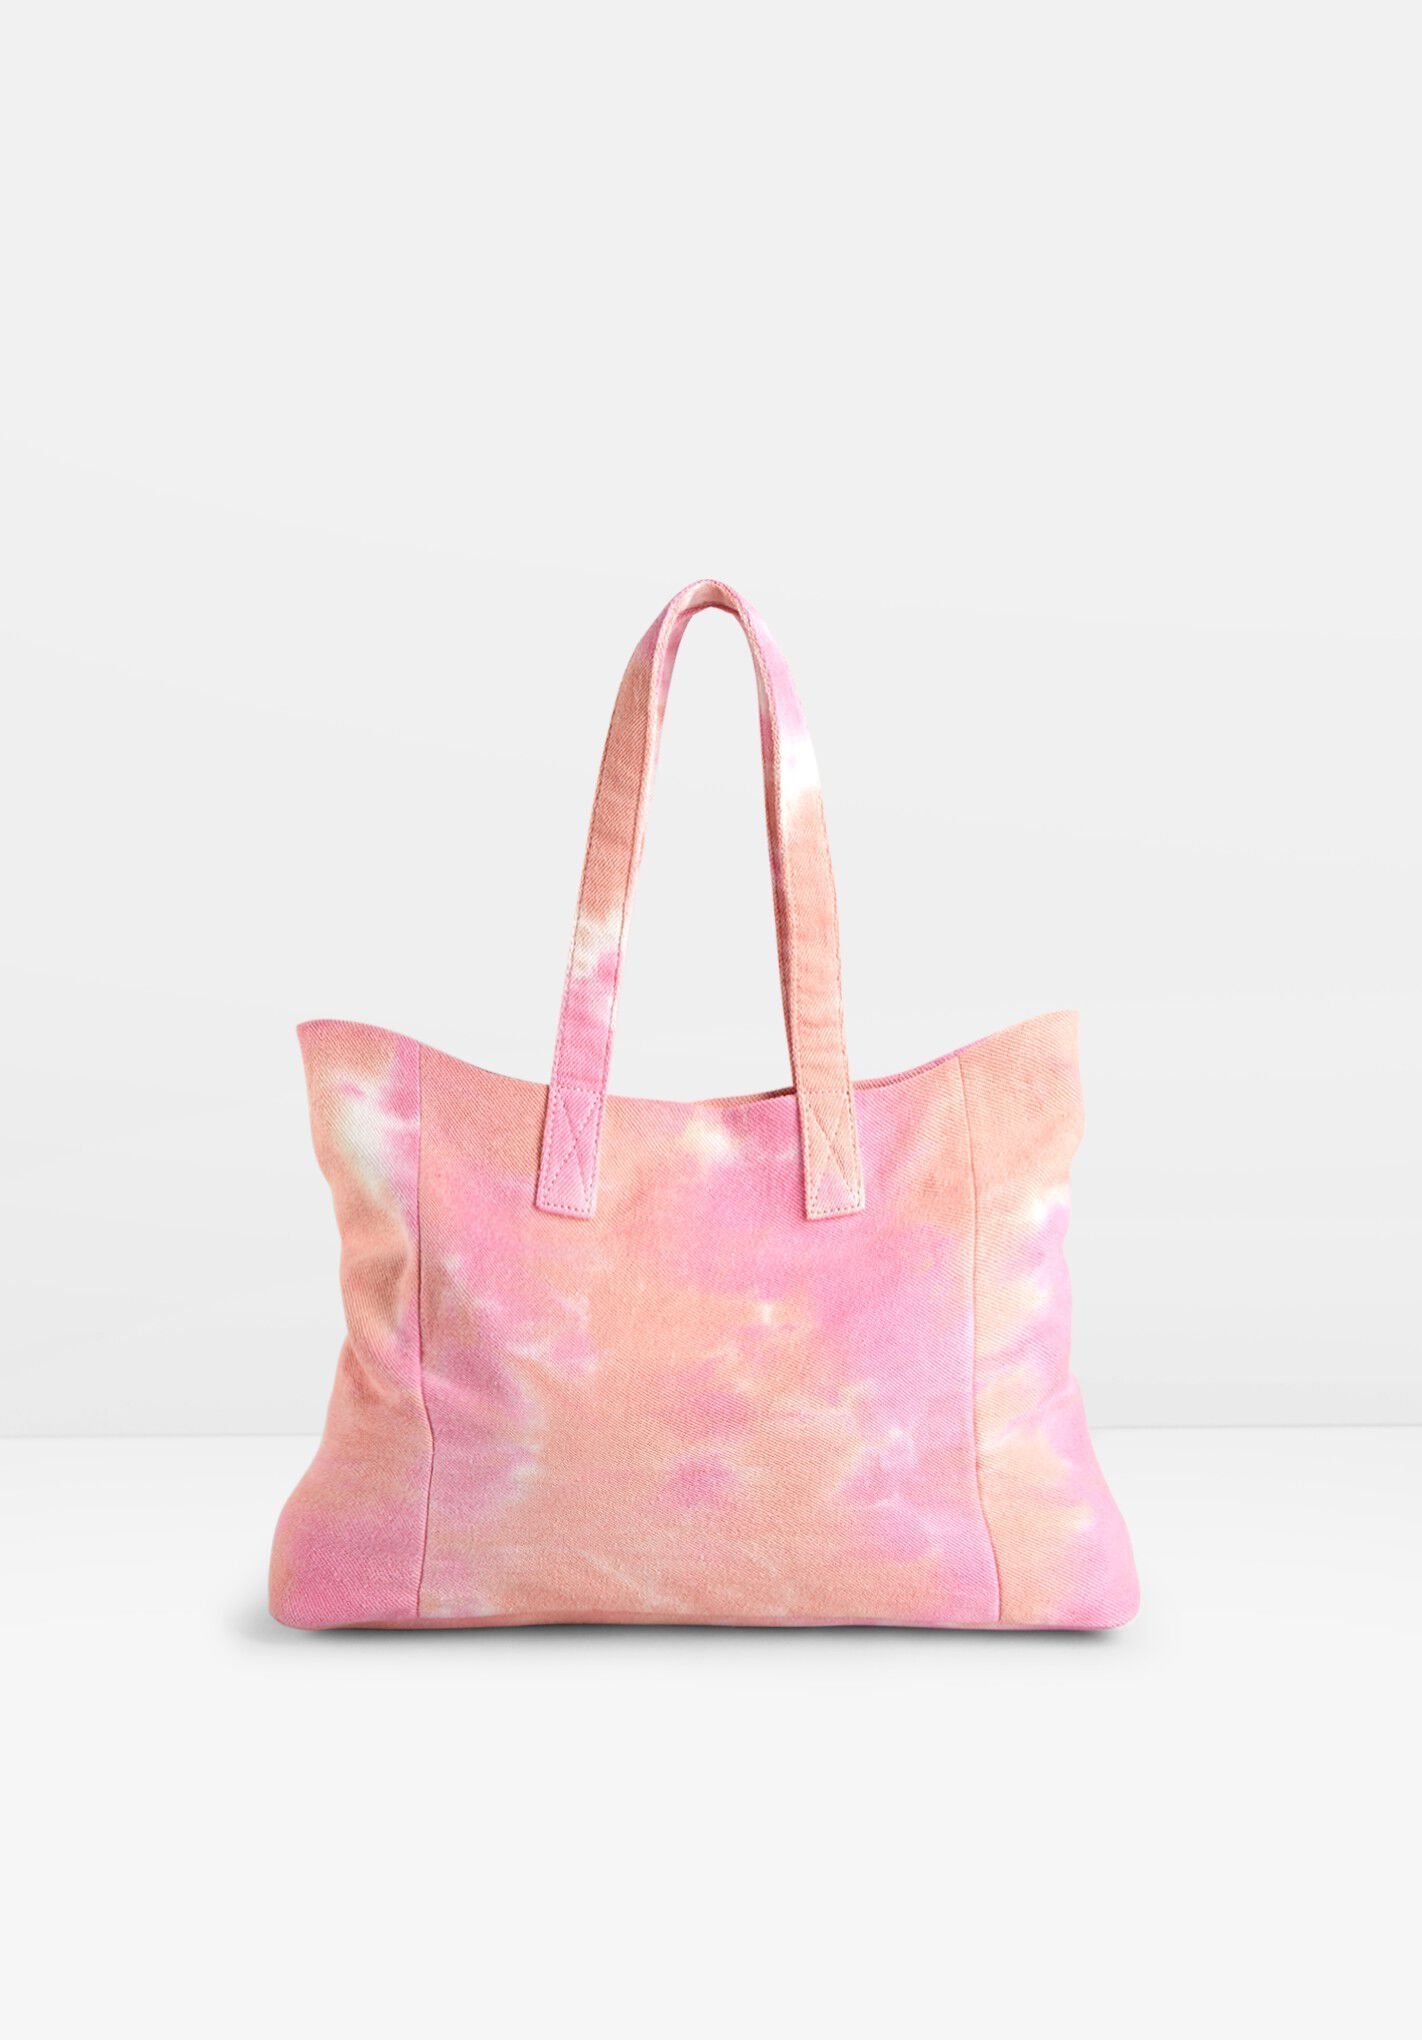 Saint Laurent Rive Gauche tote in pink and white terry cloth